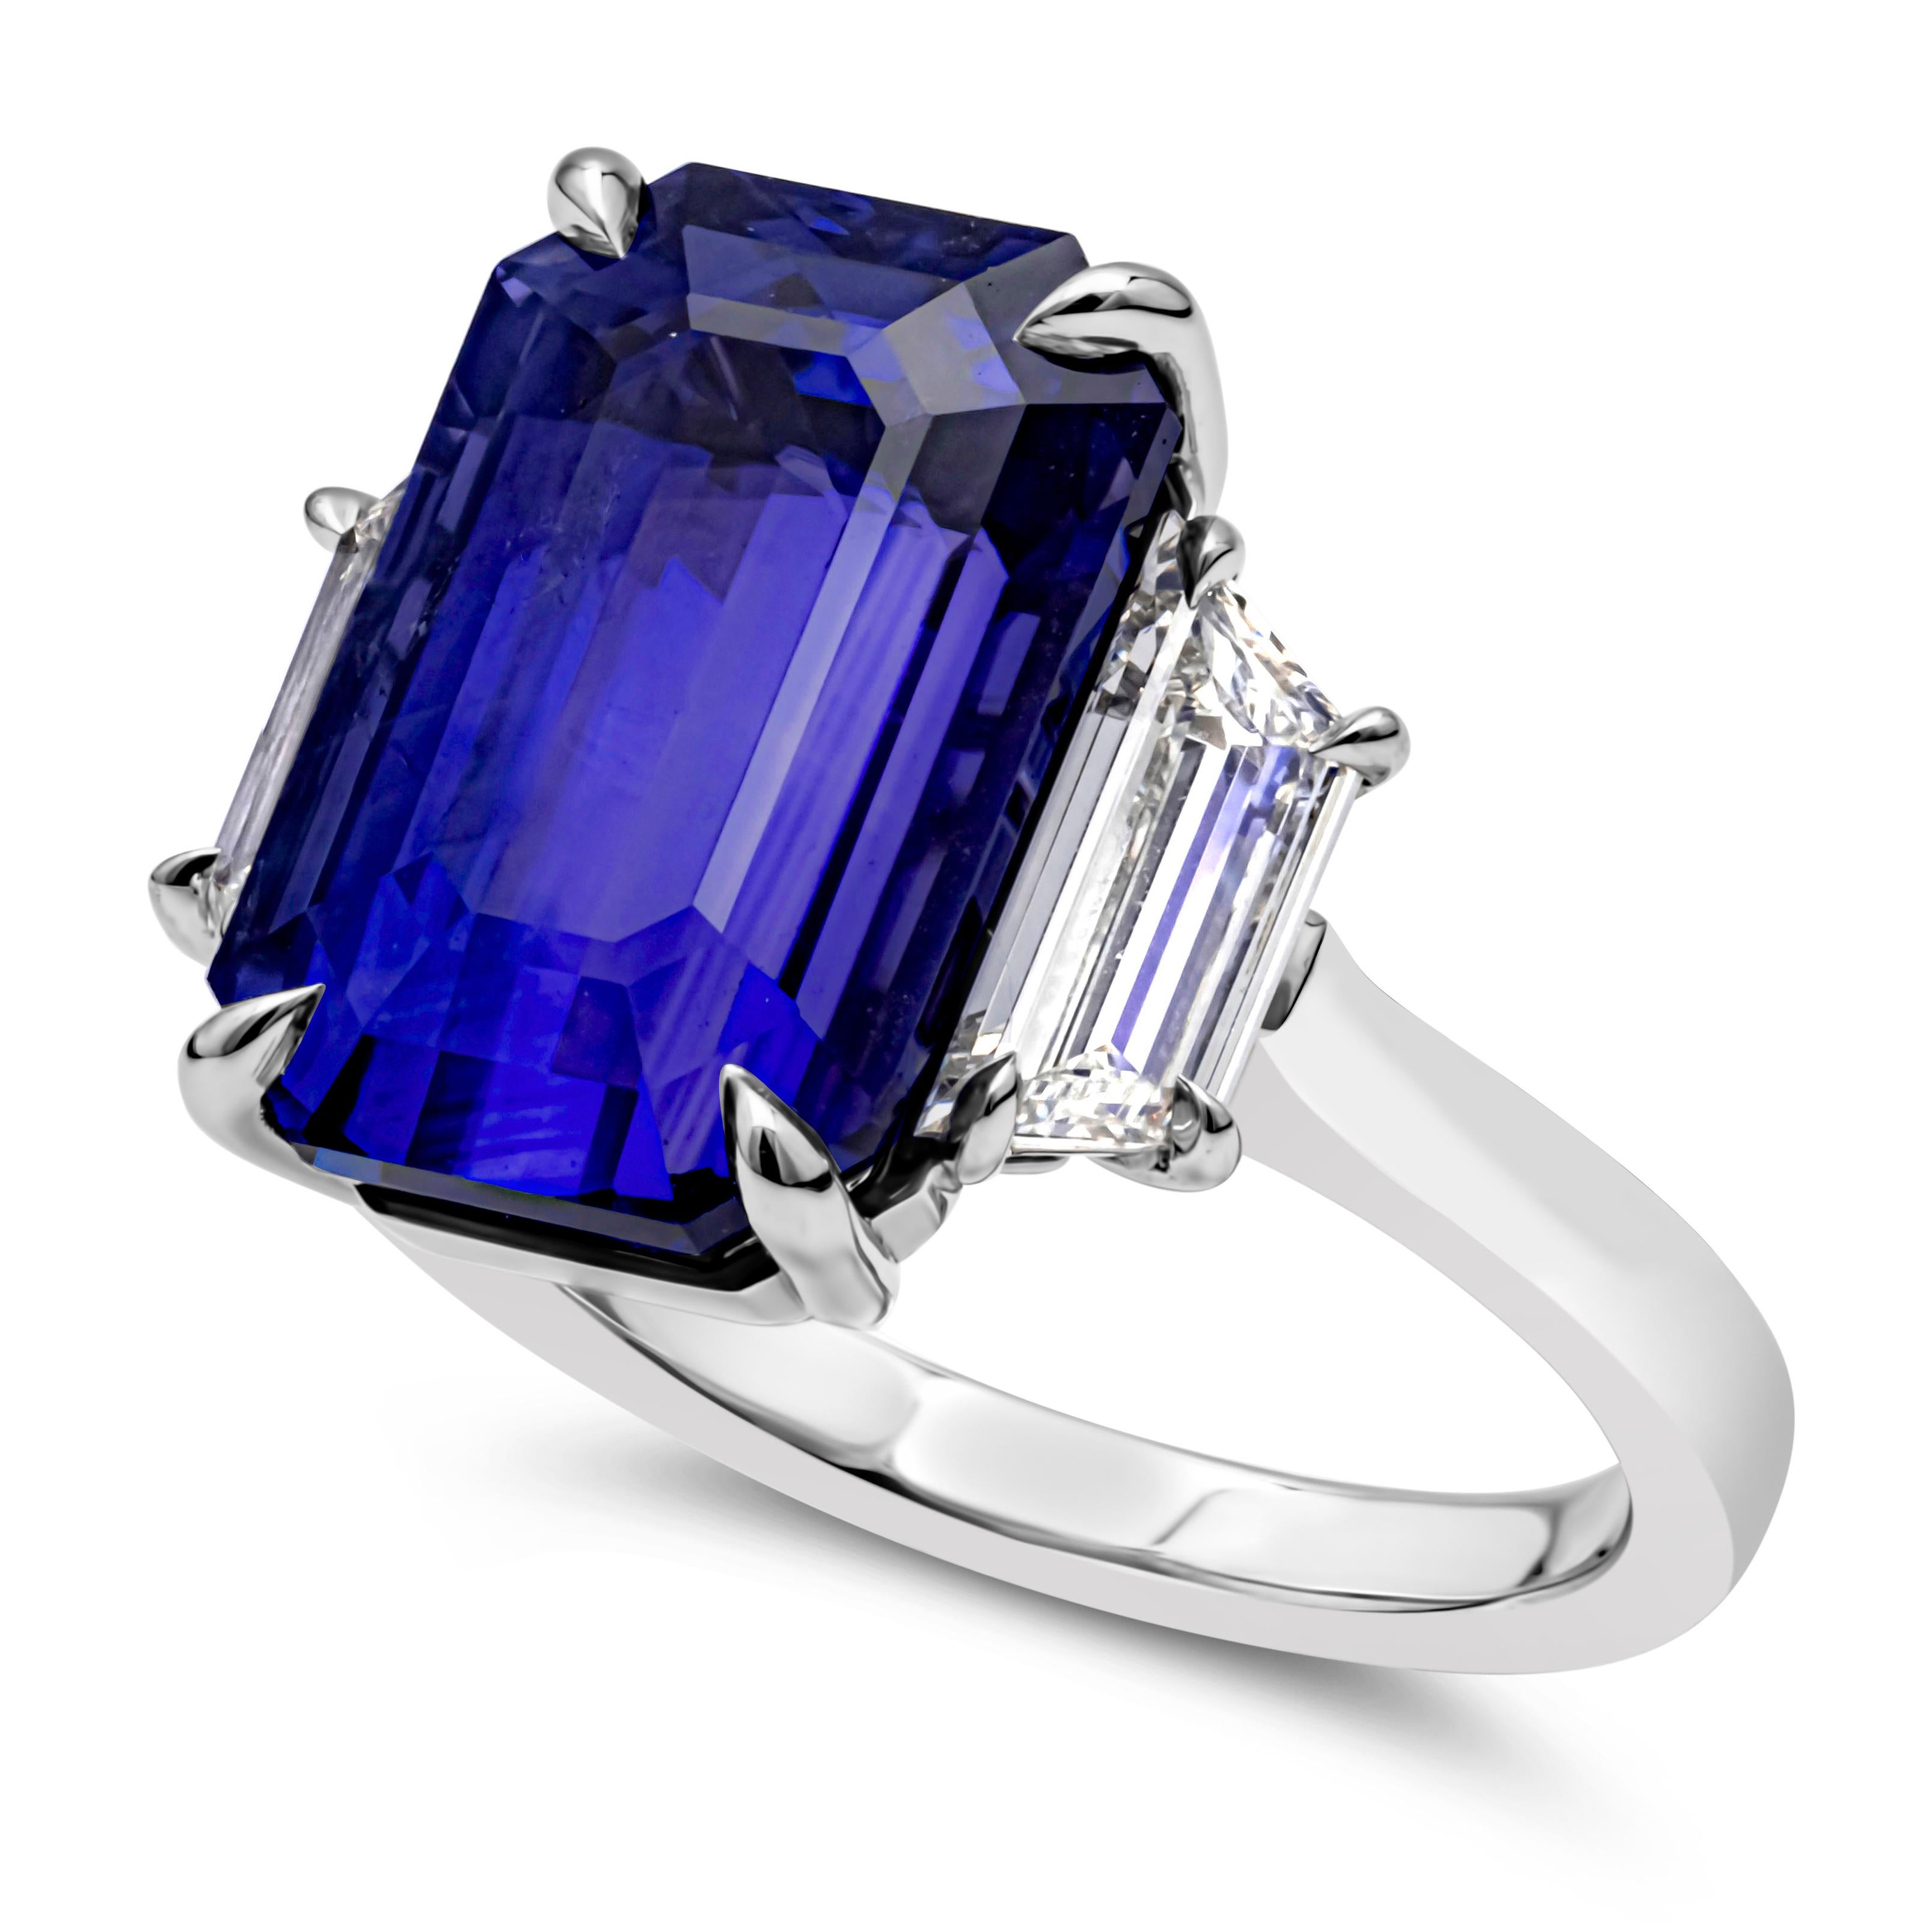 Women's 10.62 Carats Emerald Cut No-Heat Color Change Blue Sapphire Three-Stone Ring For Sale